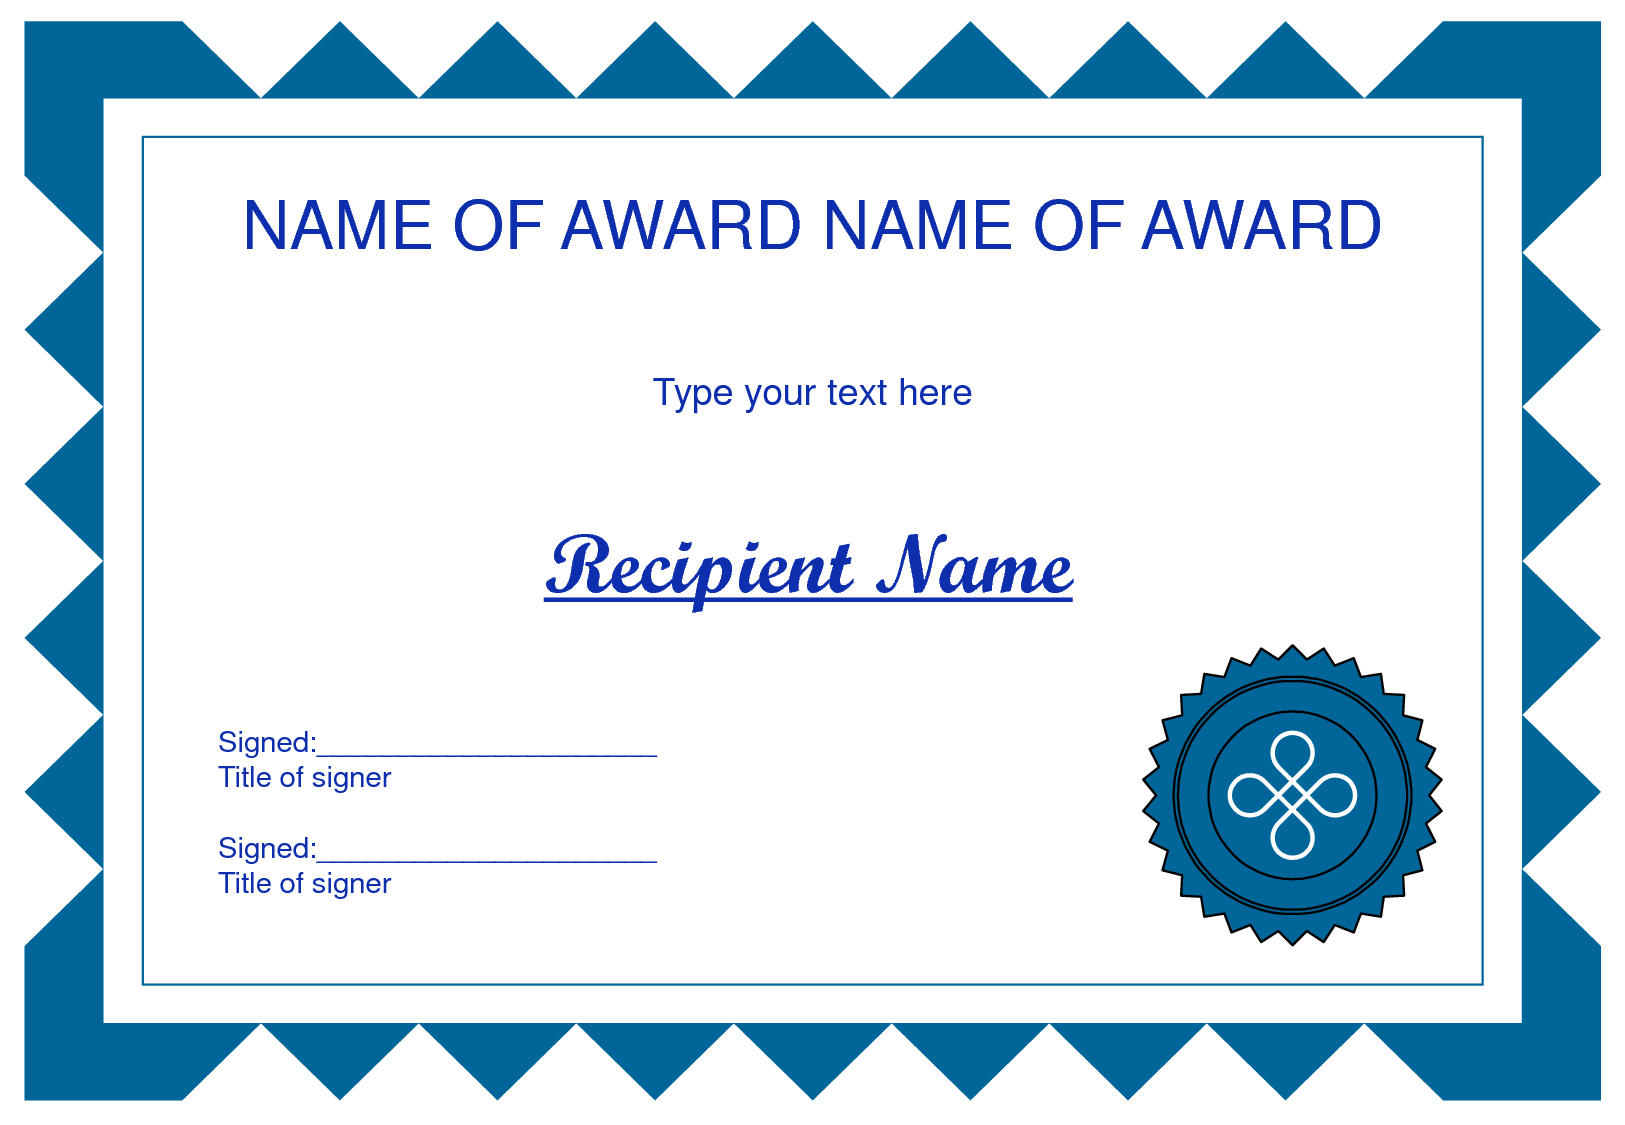 Clipart award certificate images